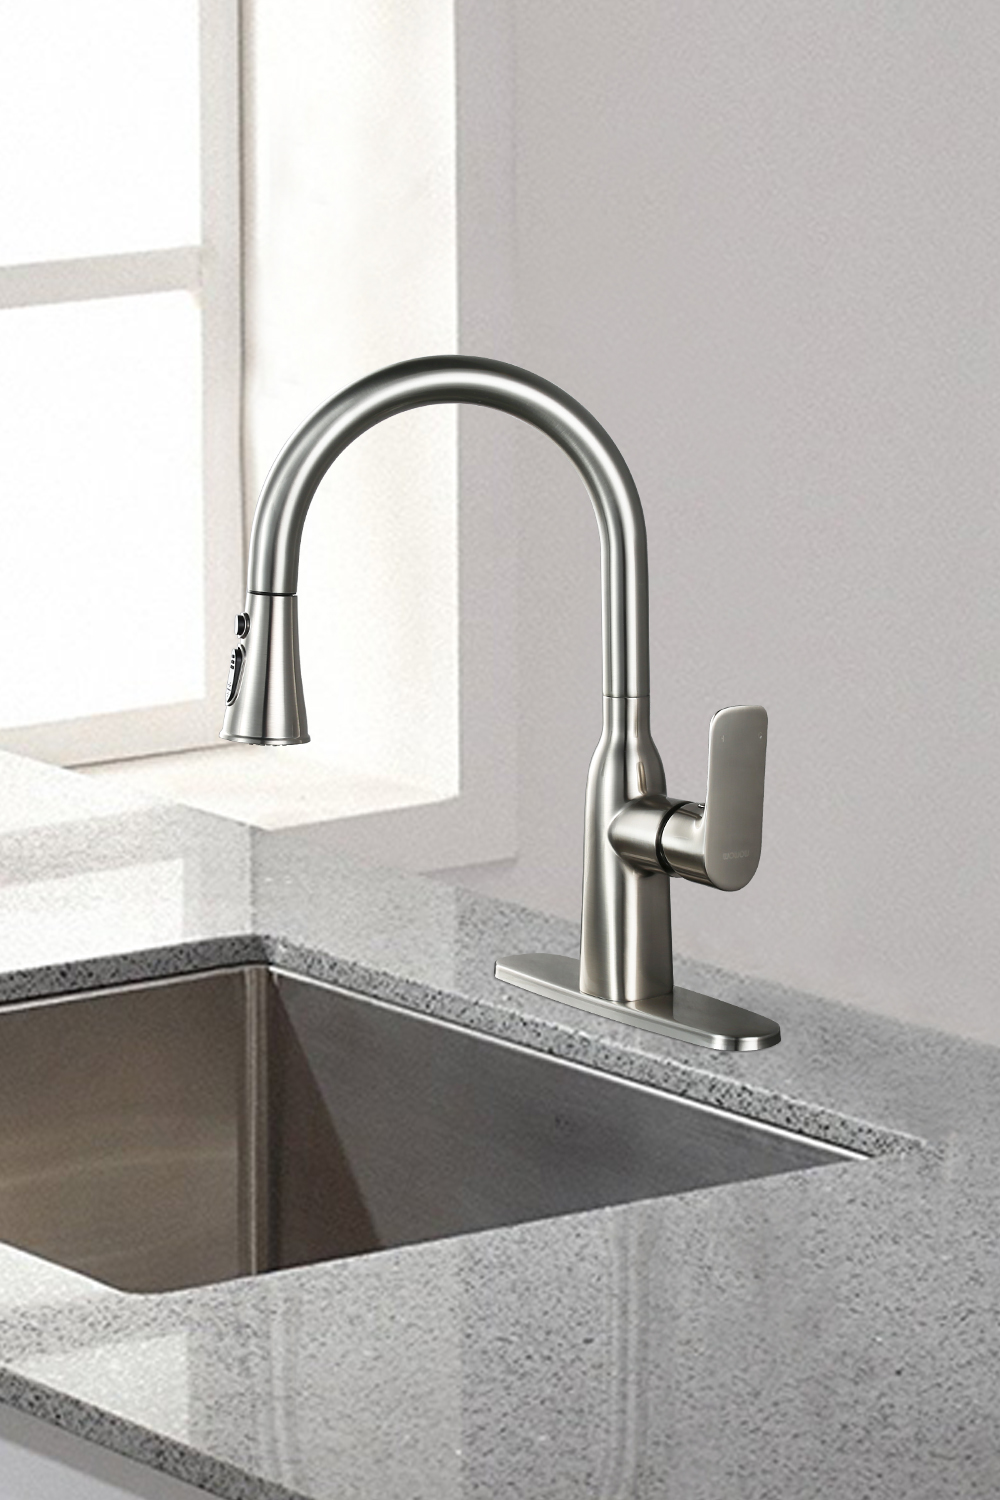 The new national standard for faucets is introduced